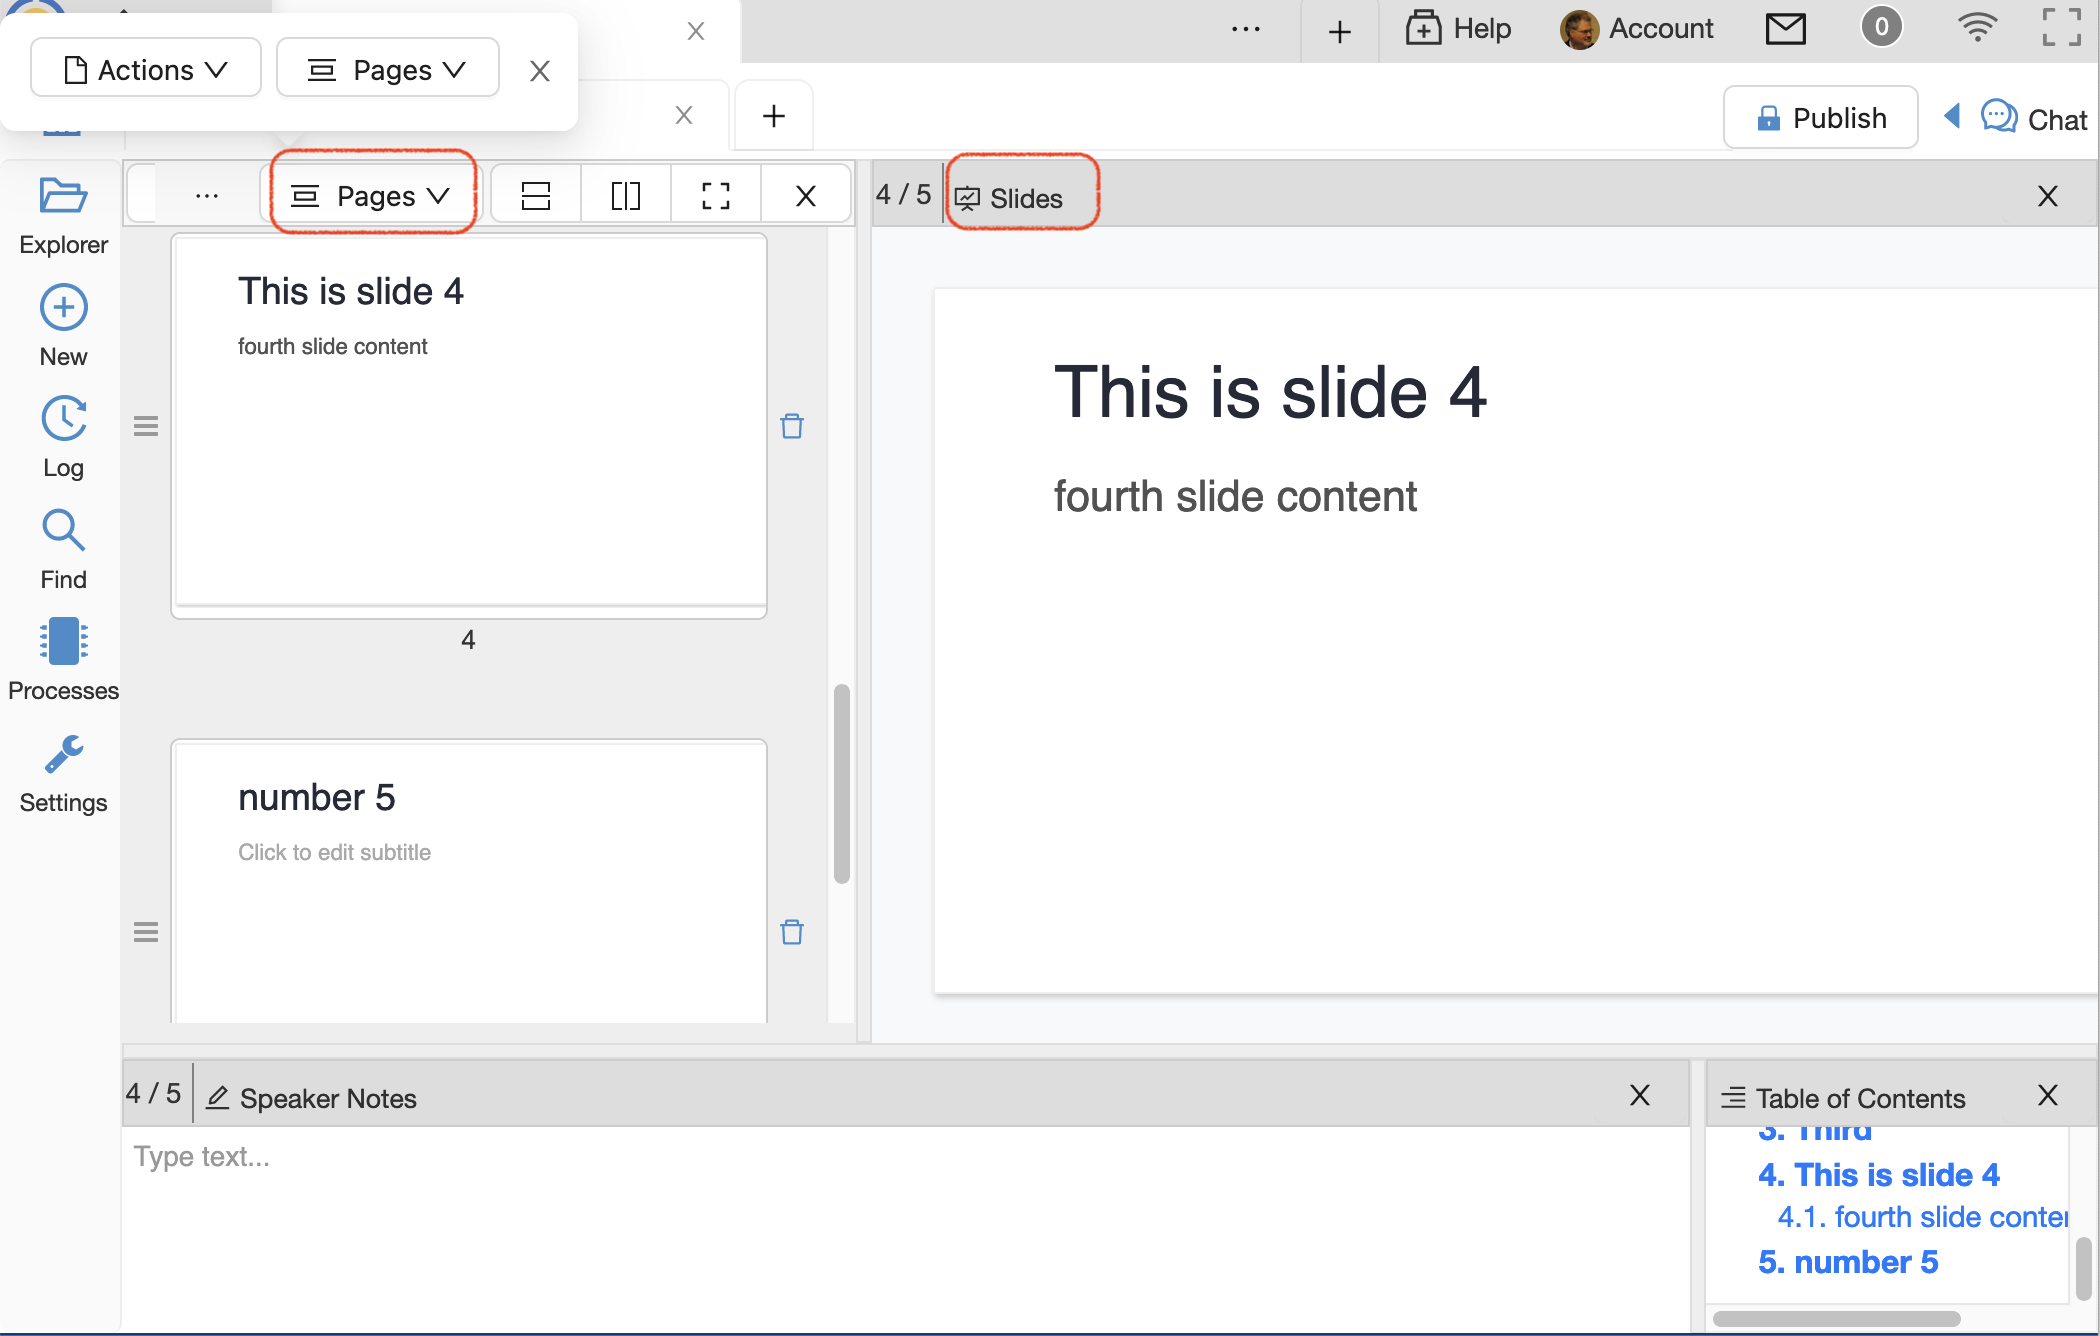 pages and slides views side by side